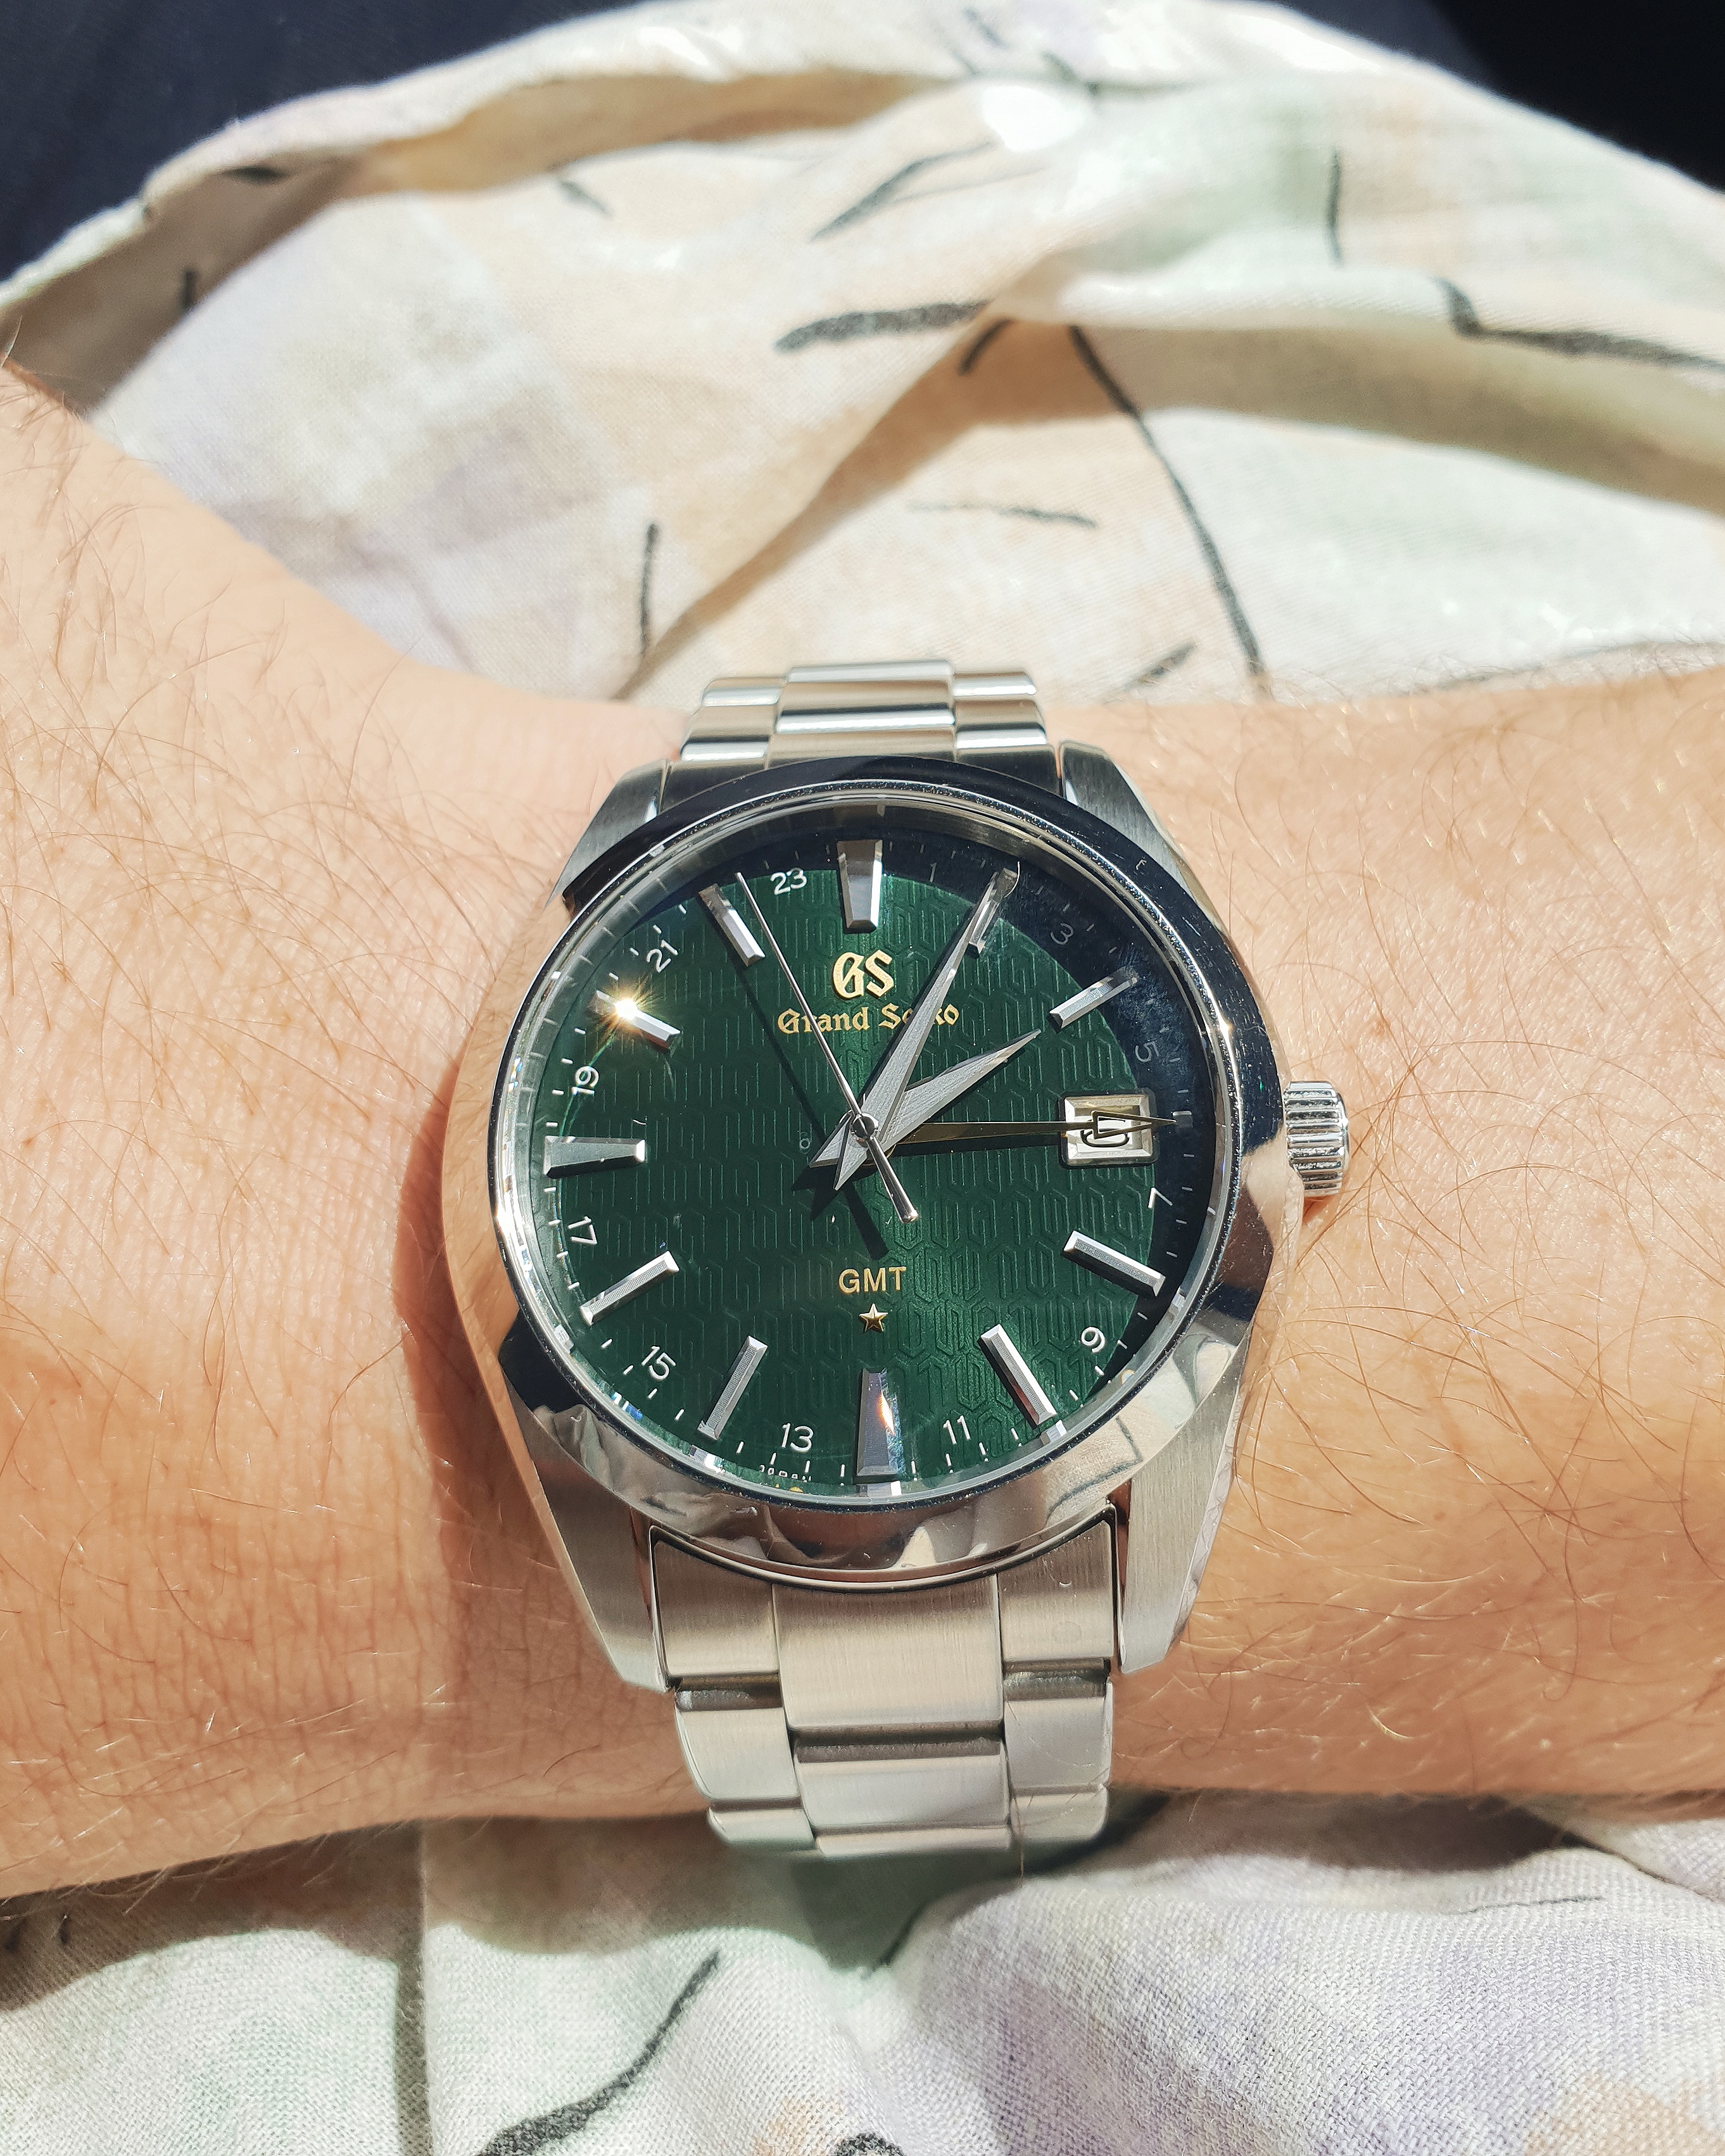 My 6 Months With The Grand Seiko Sbgn007 Time And Tide Watches